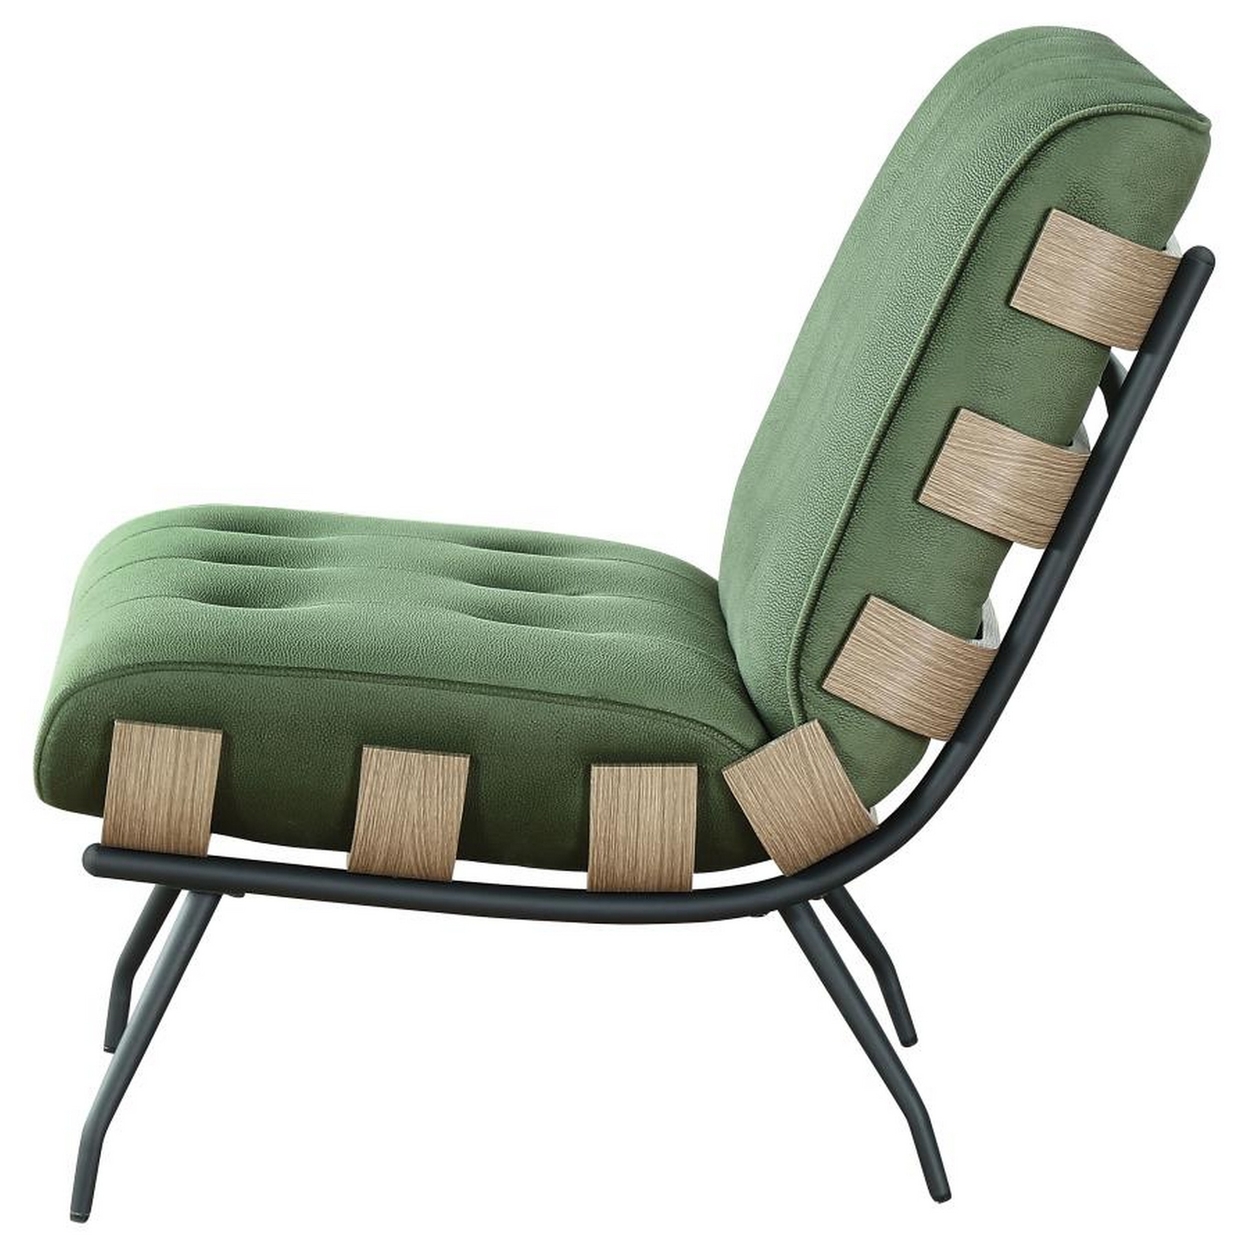 Nain 35 Inch Accent Chair, Oversized Cushion Tufted Back, Green Upholstery -Saltoro Sherpi